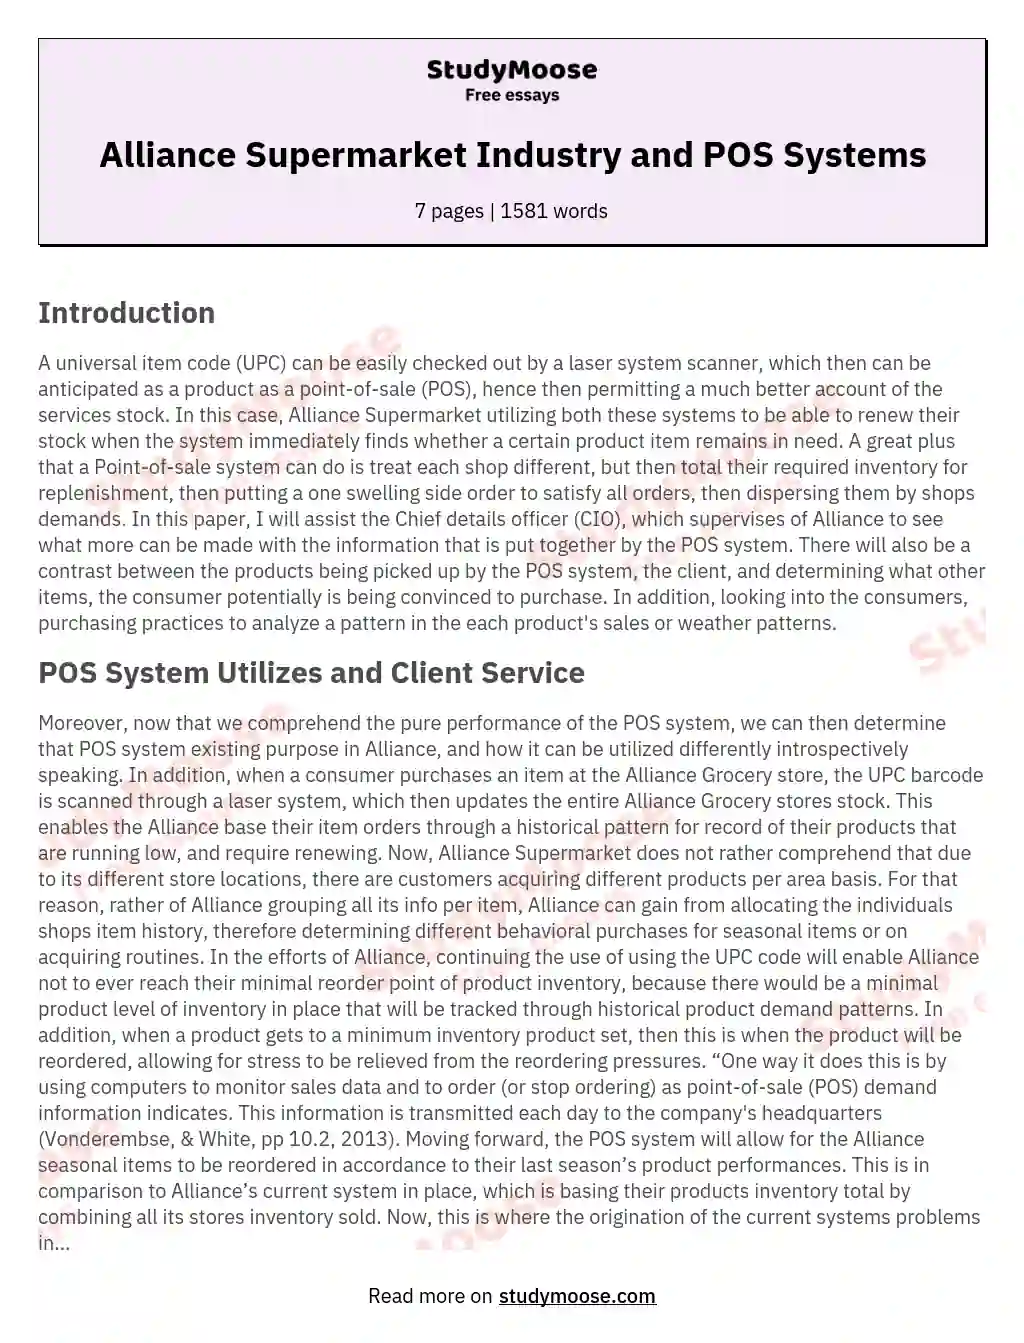 Alliance Supermarket Industry and POS Systems